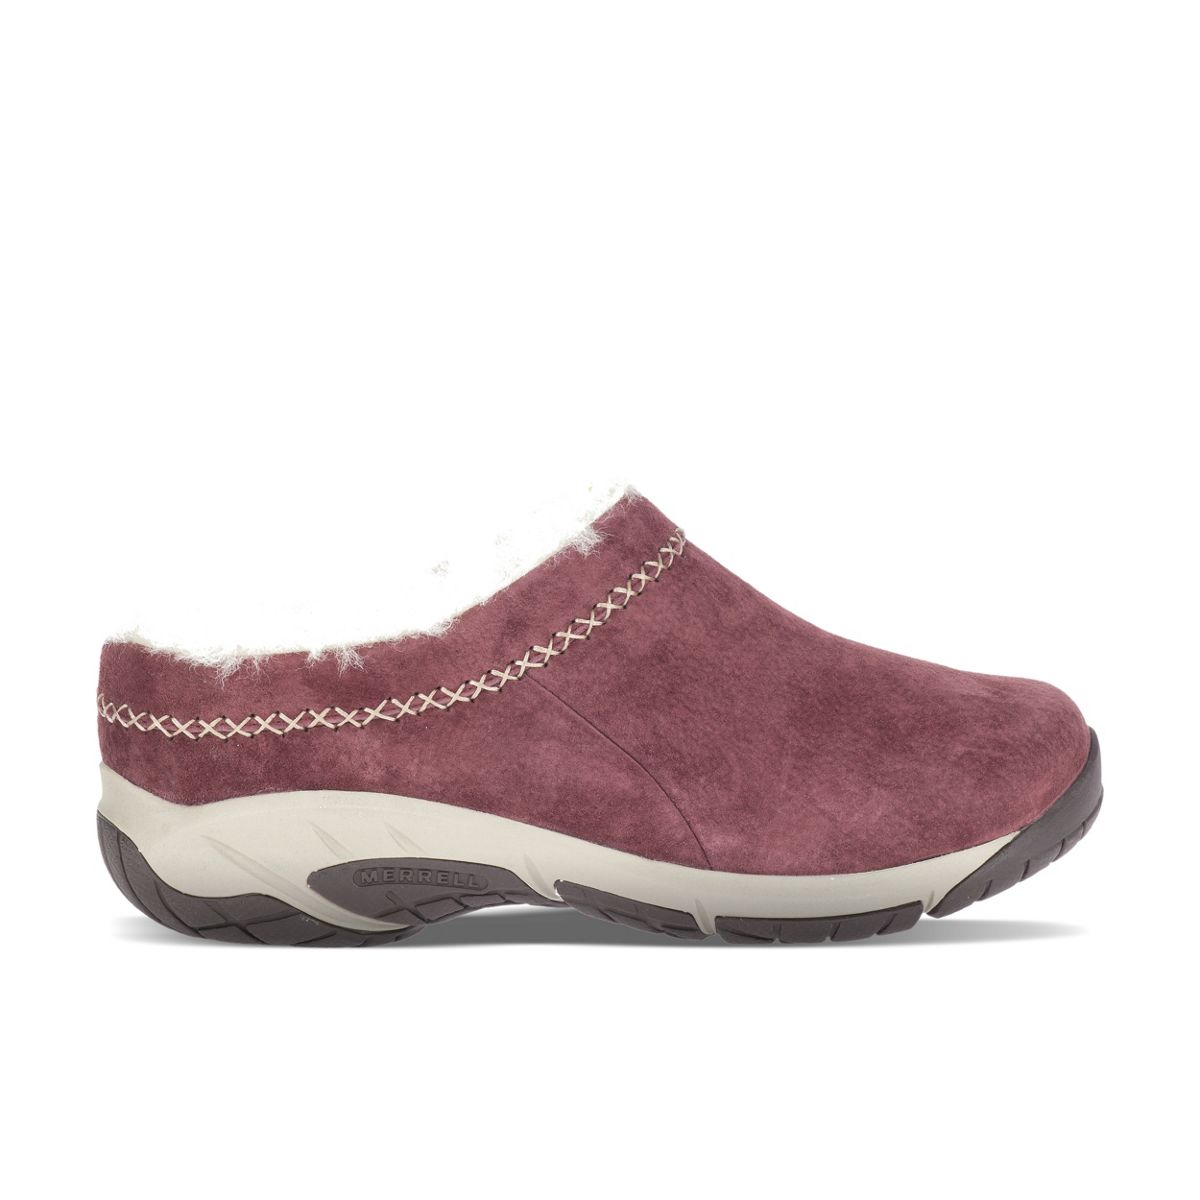 Encore Ice 4 Winter Casual Shoes | Merrell